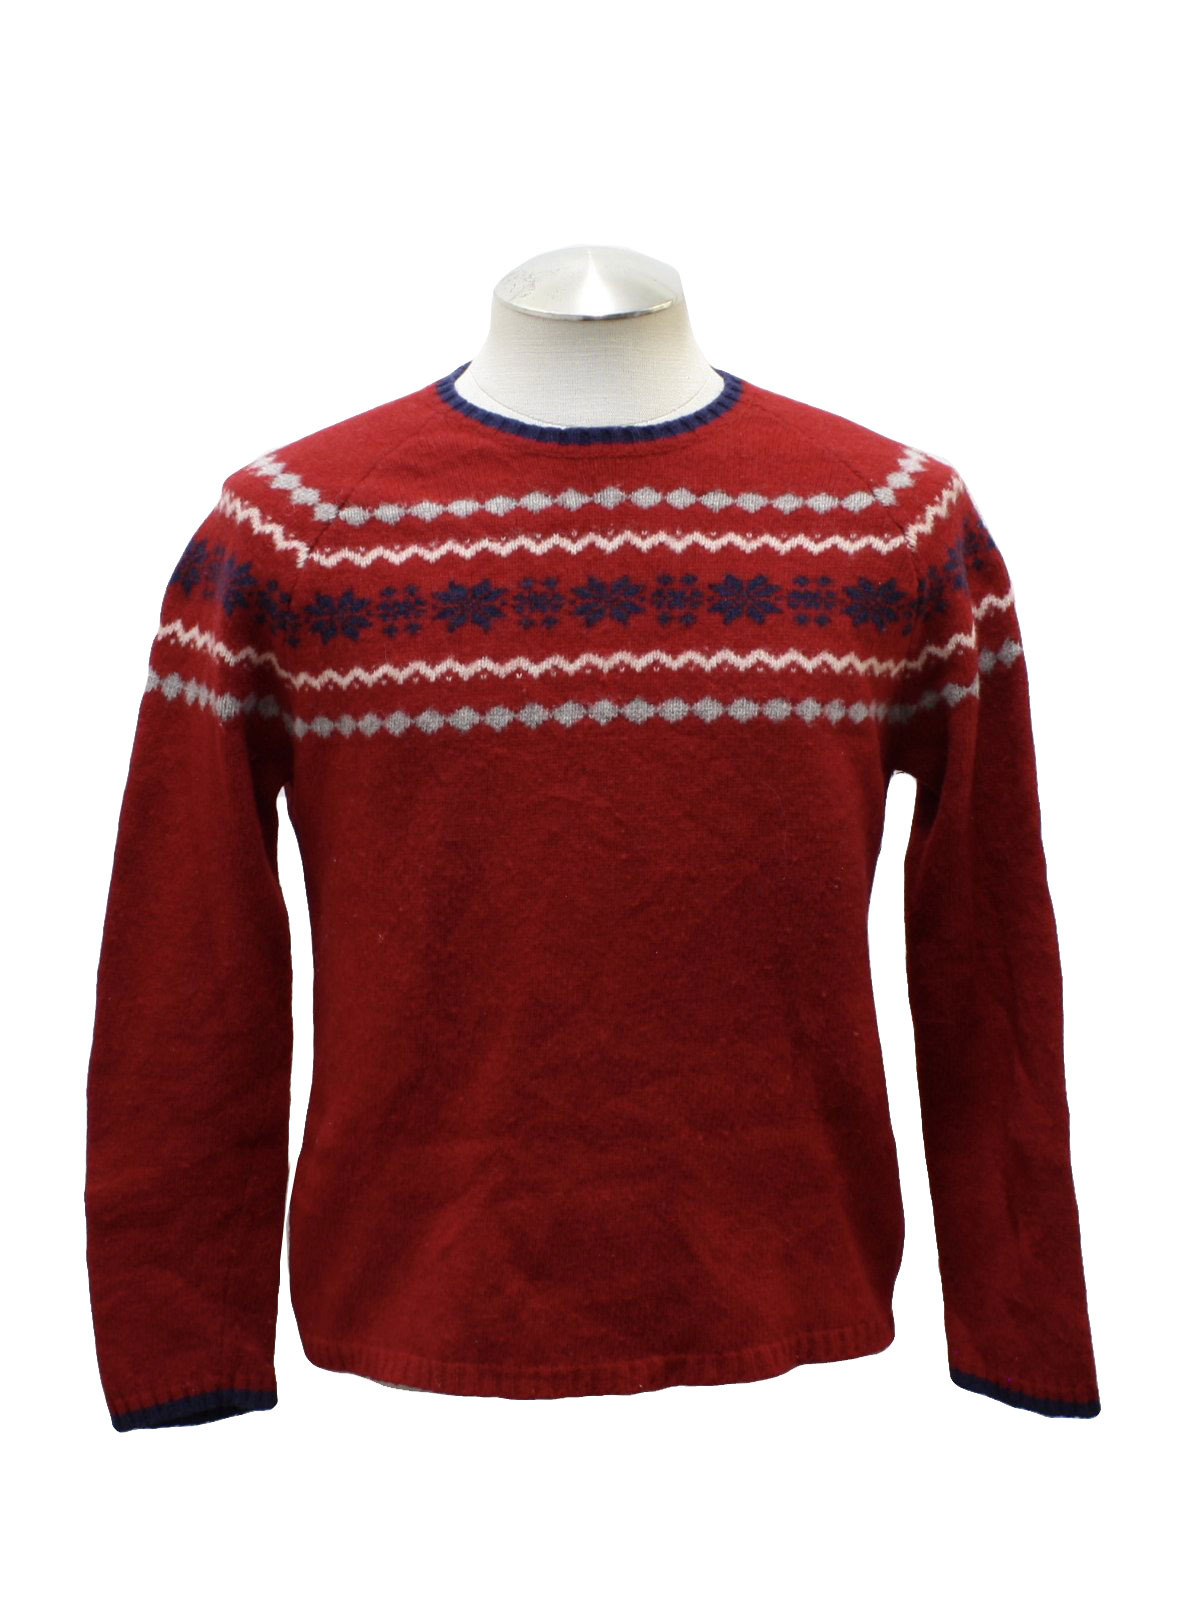 Ugly Christmas Sweater: -Old Navy- Unisex red, grey, black and beige ...